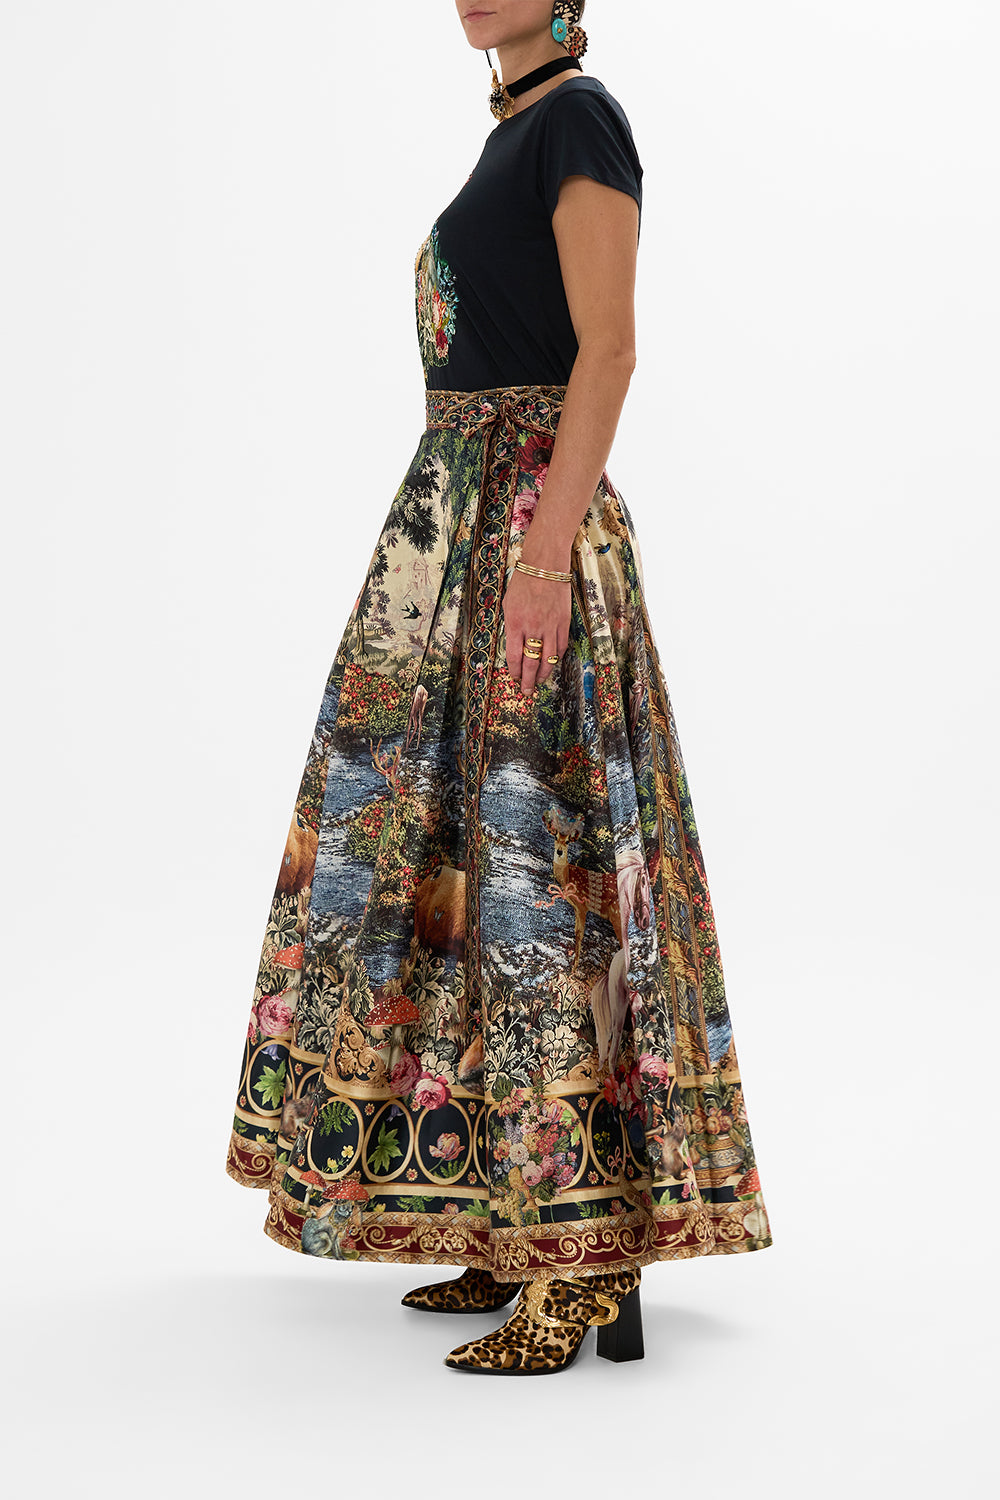 CAMILLA Floral Maxi Wrap Skirt in Tapestry Totems